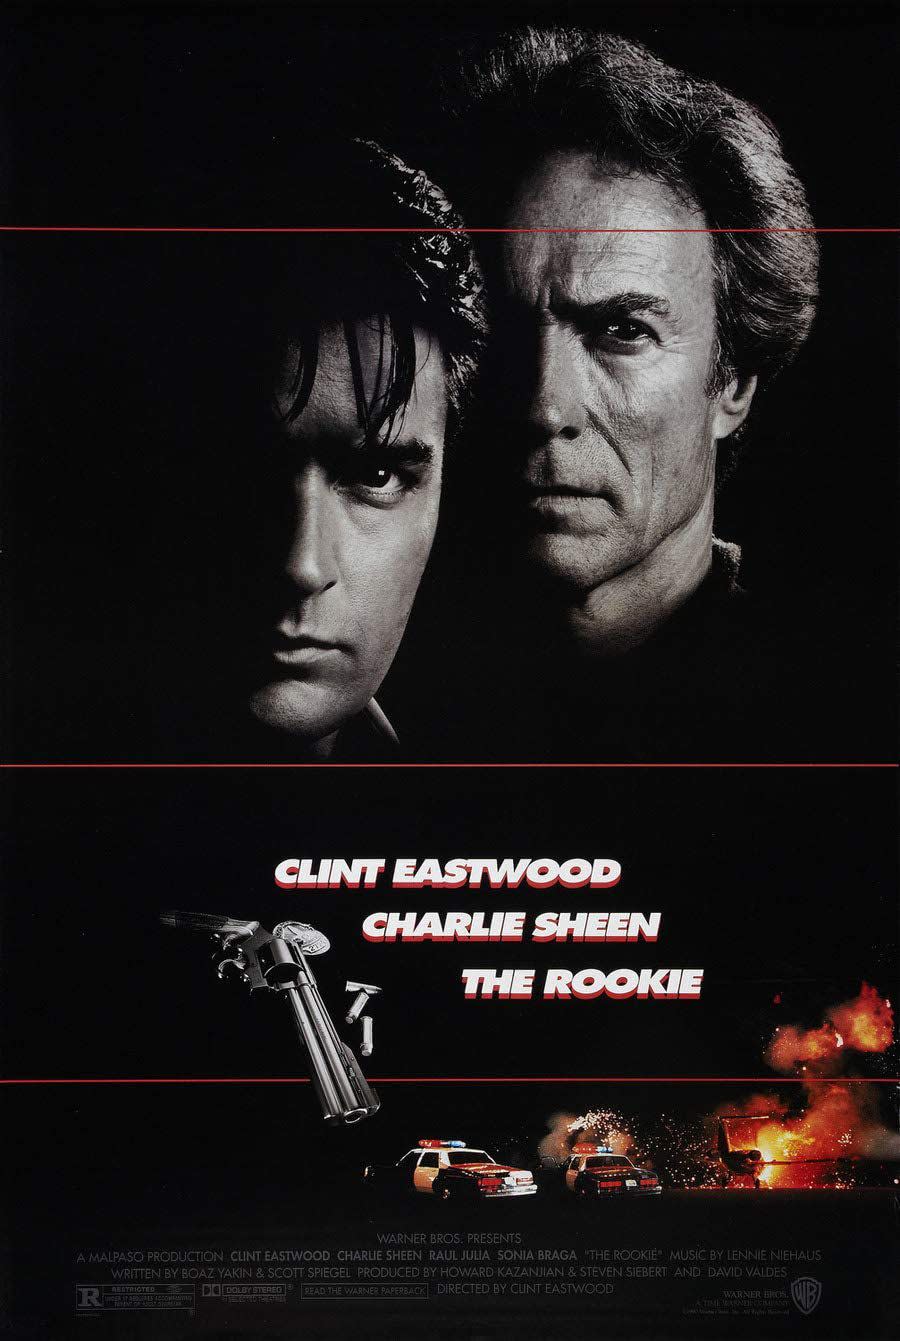 THE ROOKIE MOVIE POSTER 2 Sided ORIGINAL 27x40 CLINT EASTWOOD CHARLIE SHEEN